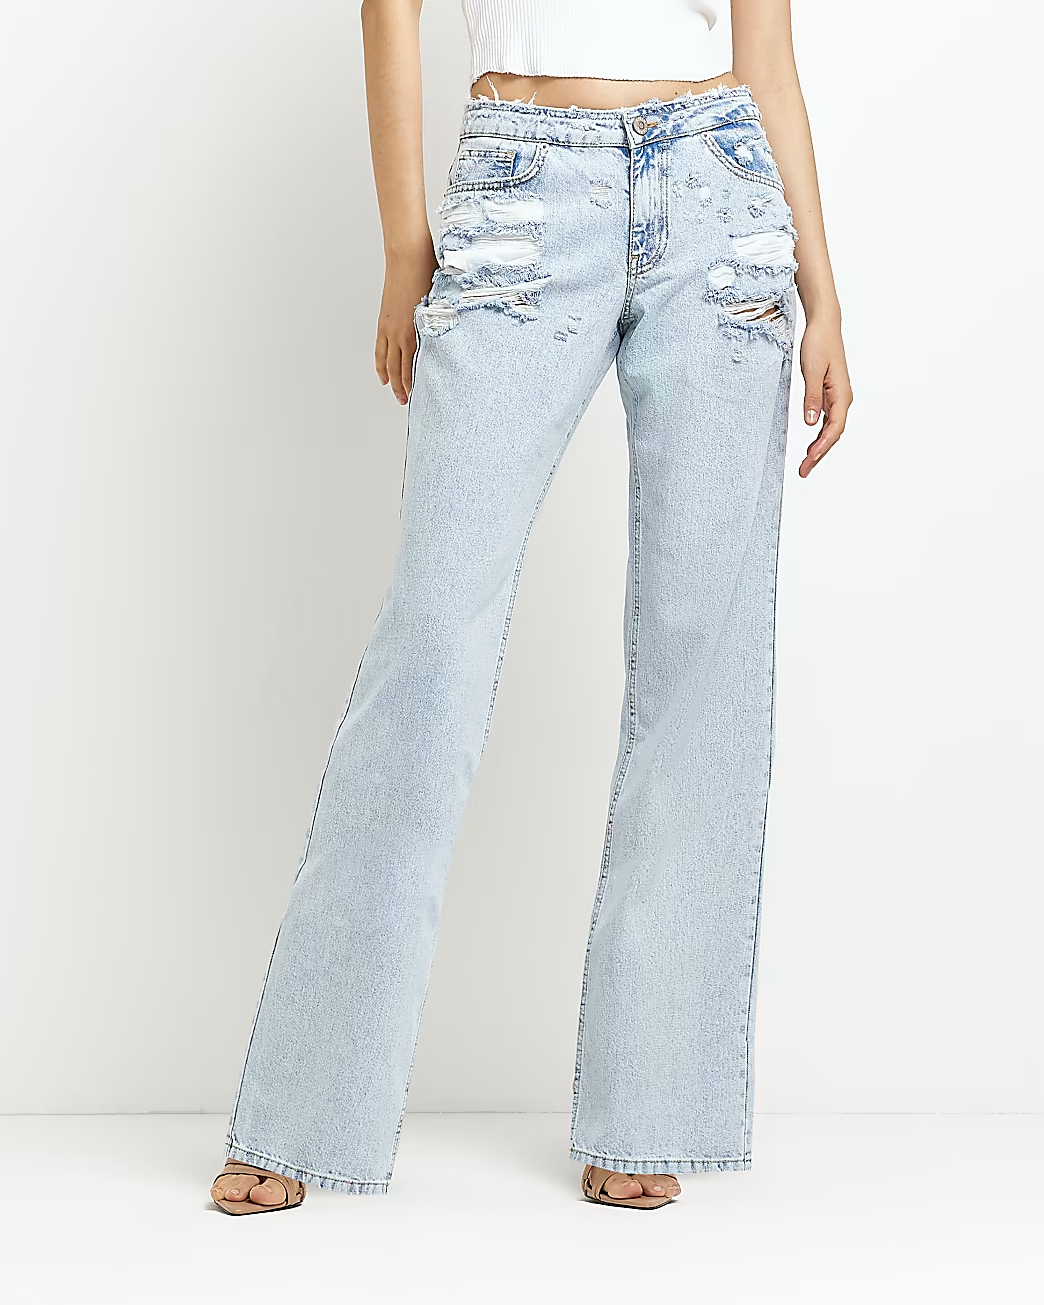 BLUE RIPPED MID RISE STRAIGHT LEG JEANS